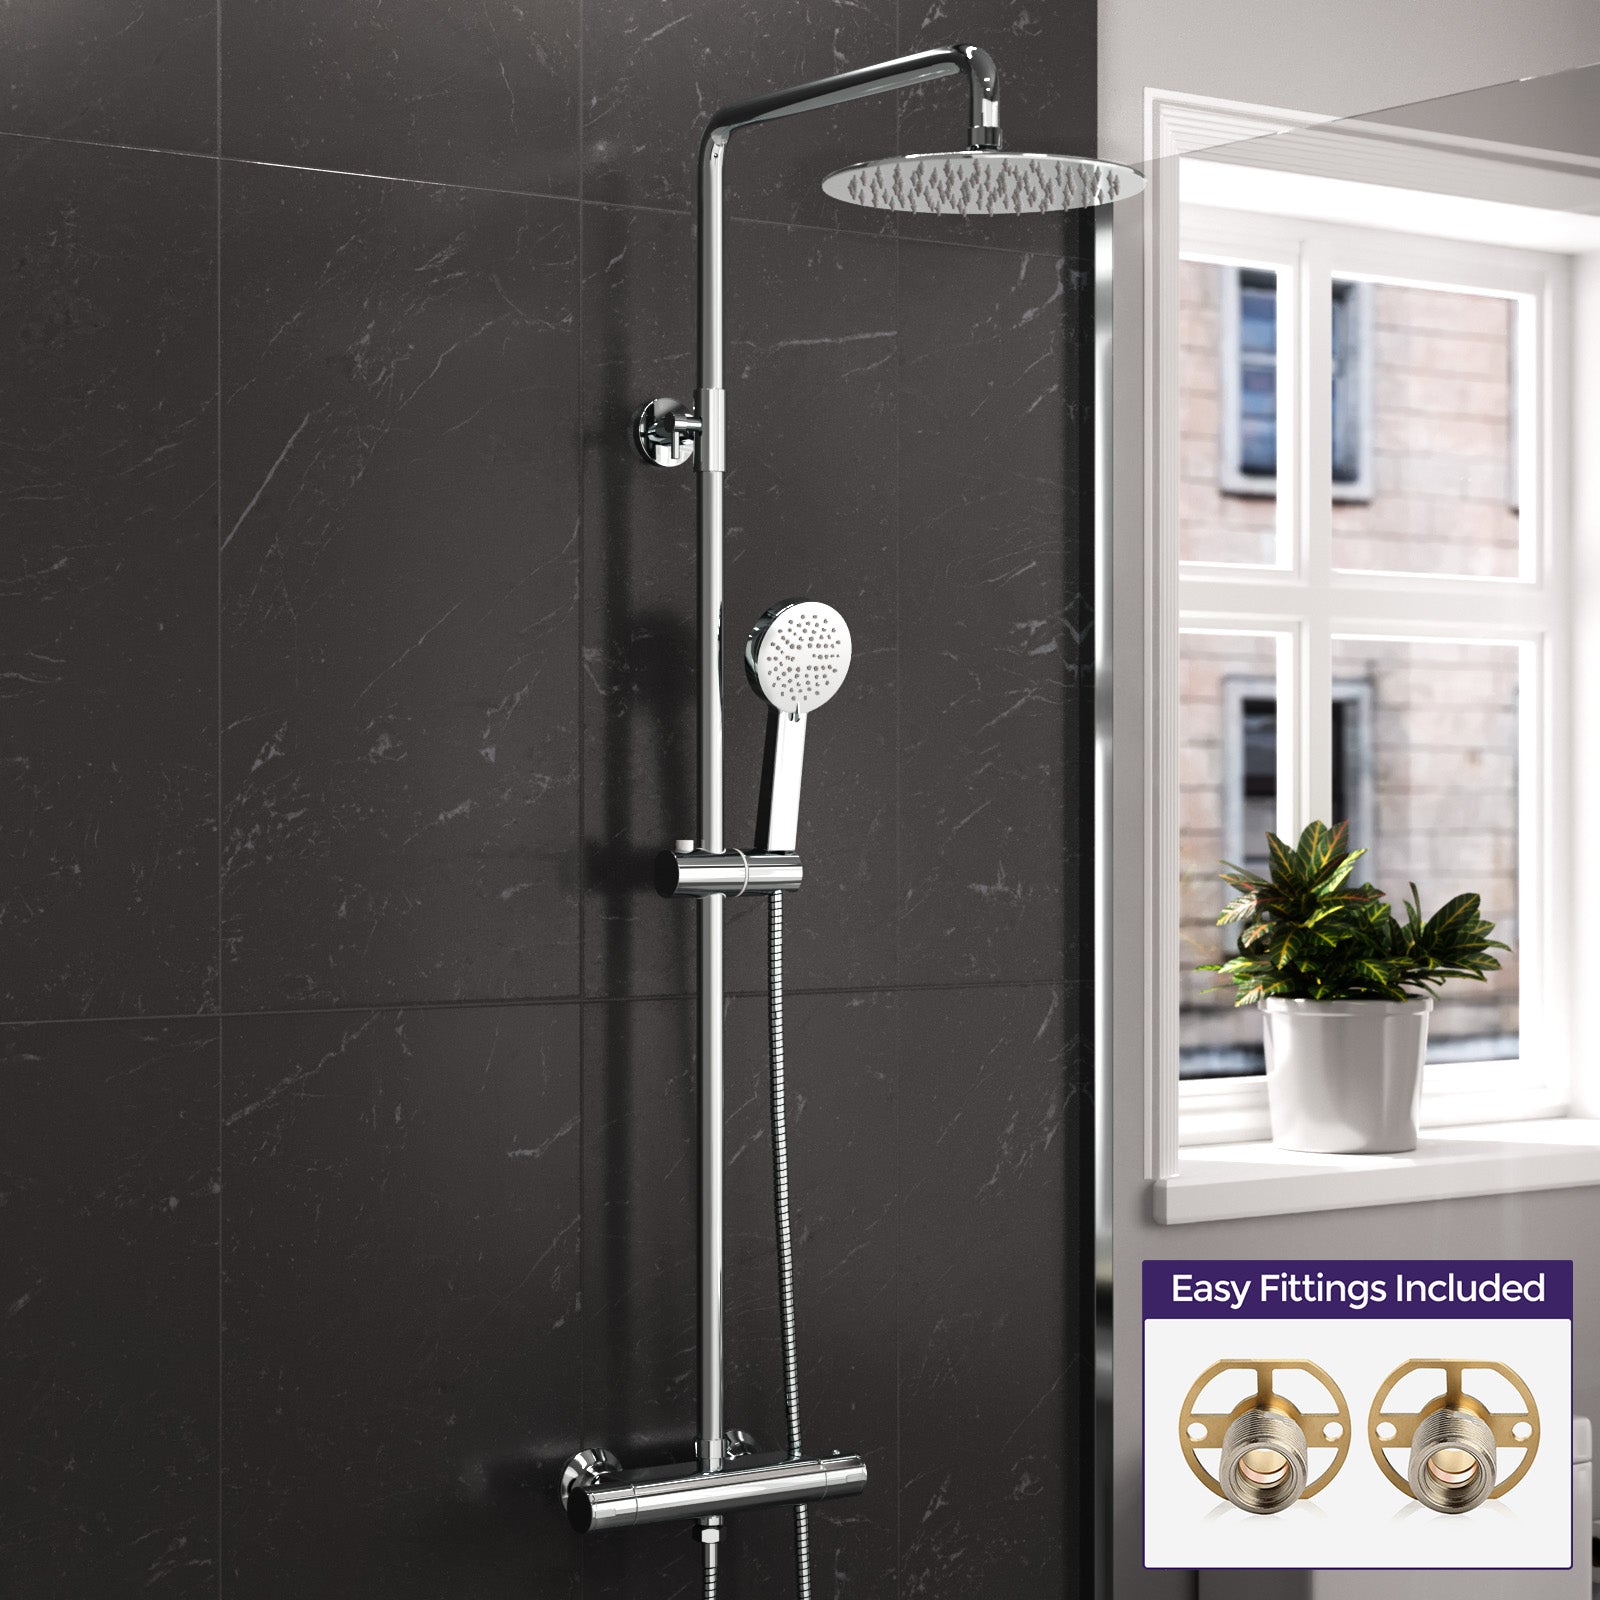 Modern Round Exposed 2 Way Thermostatic Mixer Shower Set With Easy Fittings